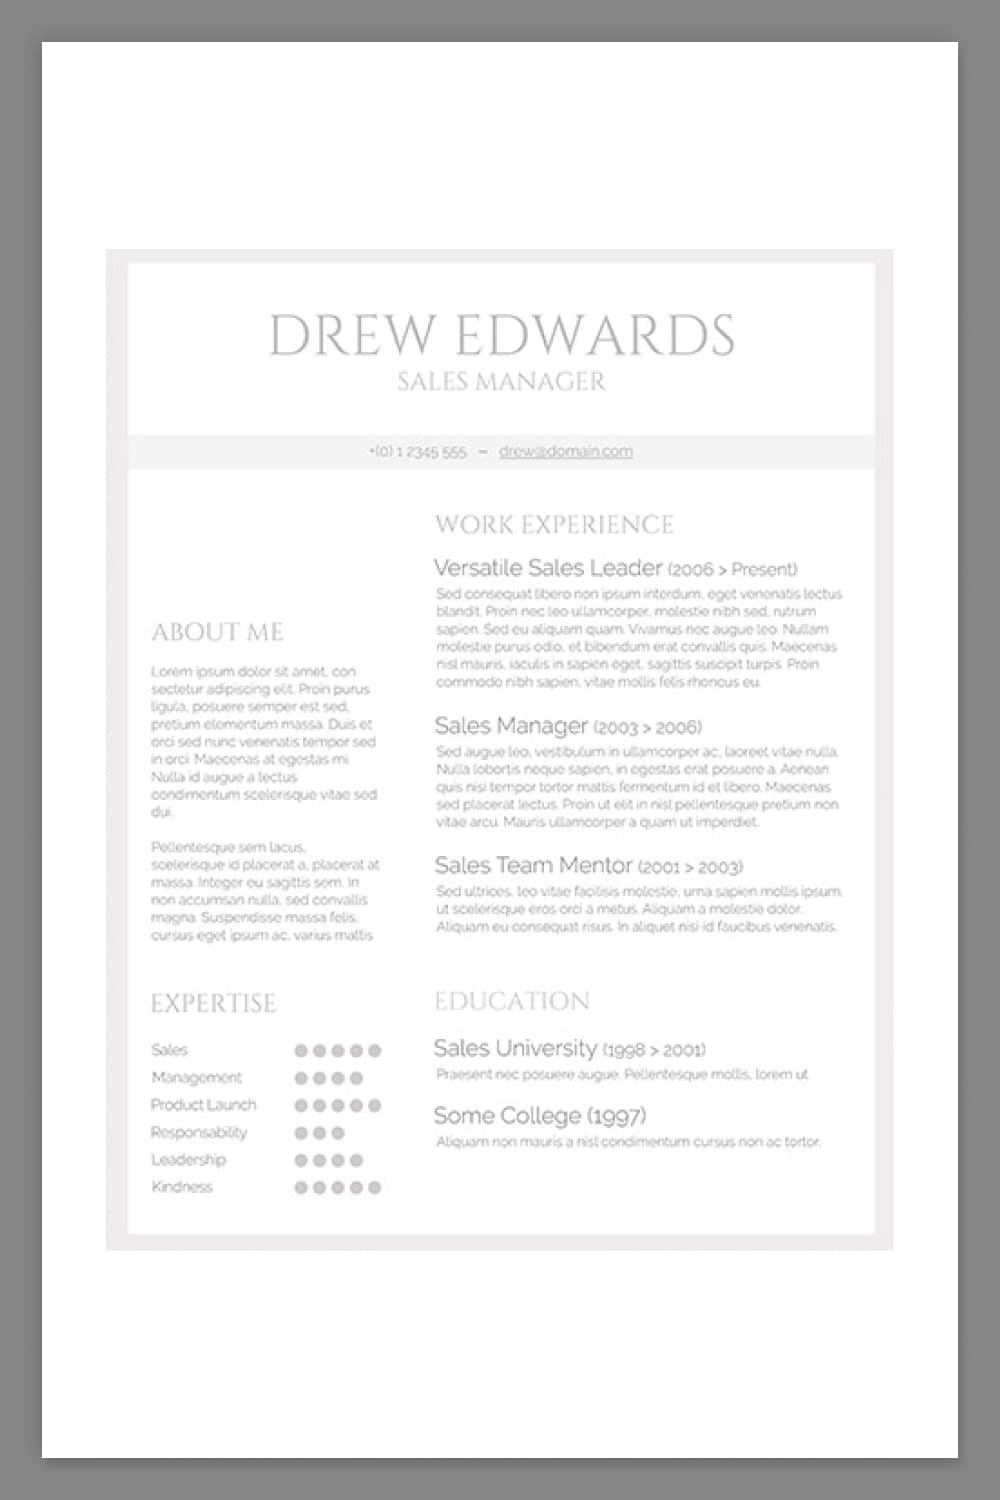 Resume with white background and light gray text.